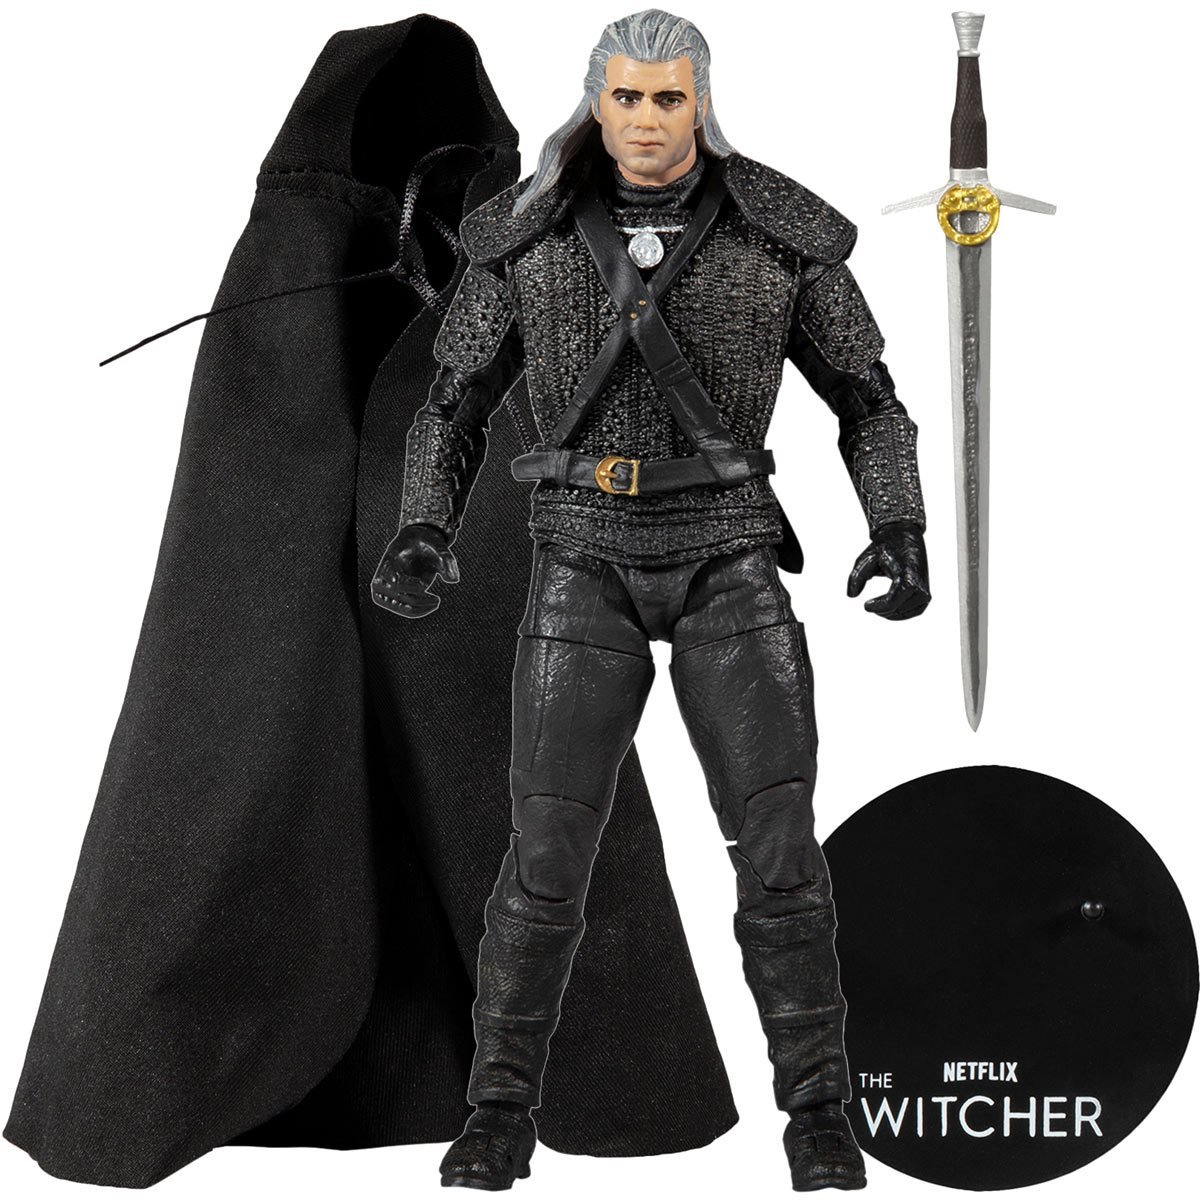 Wario64 Auf Twitter Mcfarlane Toys The Witcher Netflix Geralt Or Rivia 7 Action Figure With Accessories Is Up For Preorder On Amazon 29 99 T Co Ekq4tqgmwo Ad T Co Nlv8xjfujx Twitter